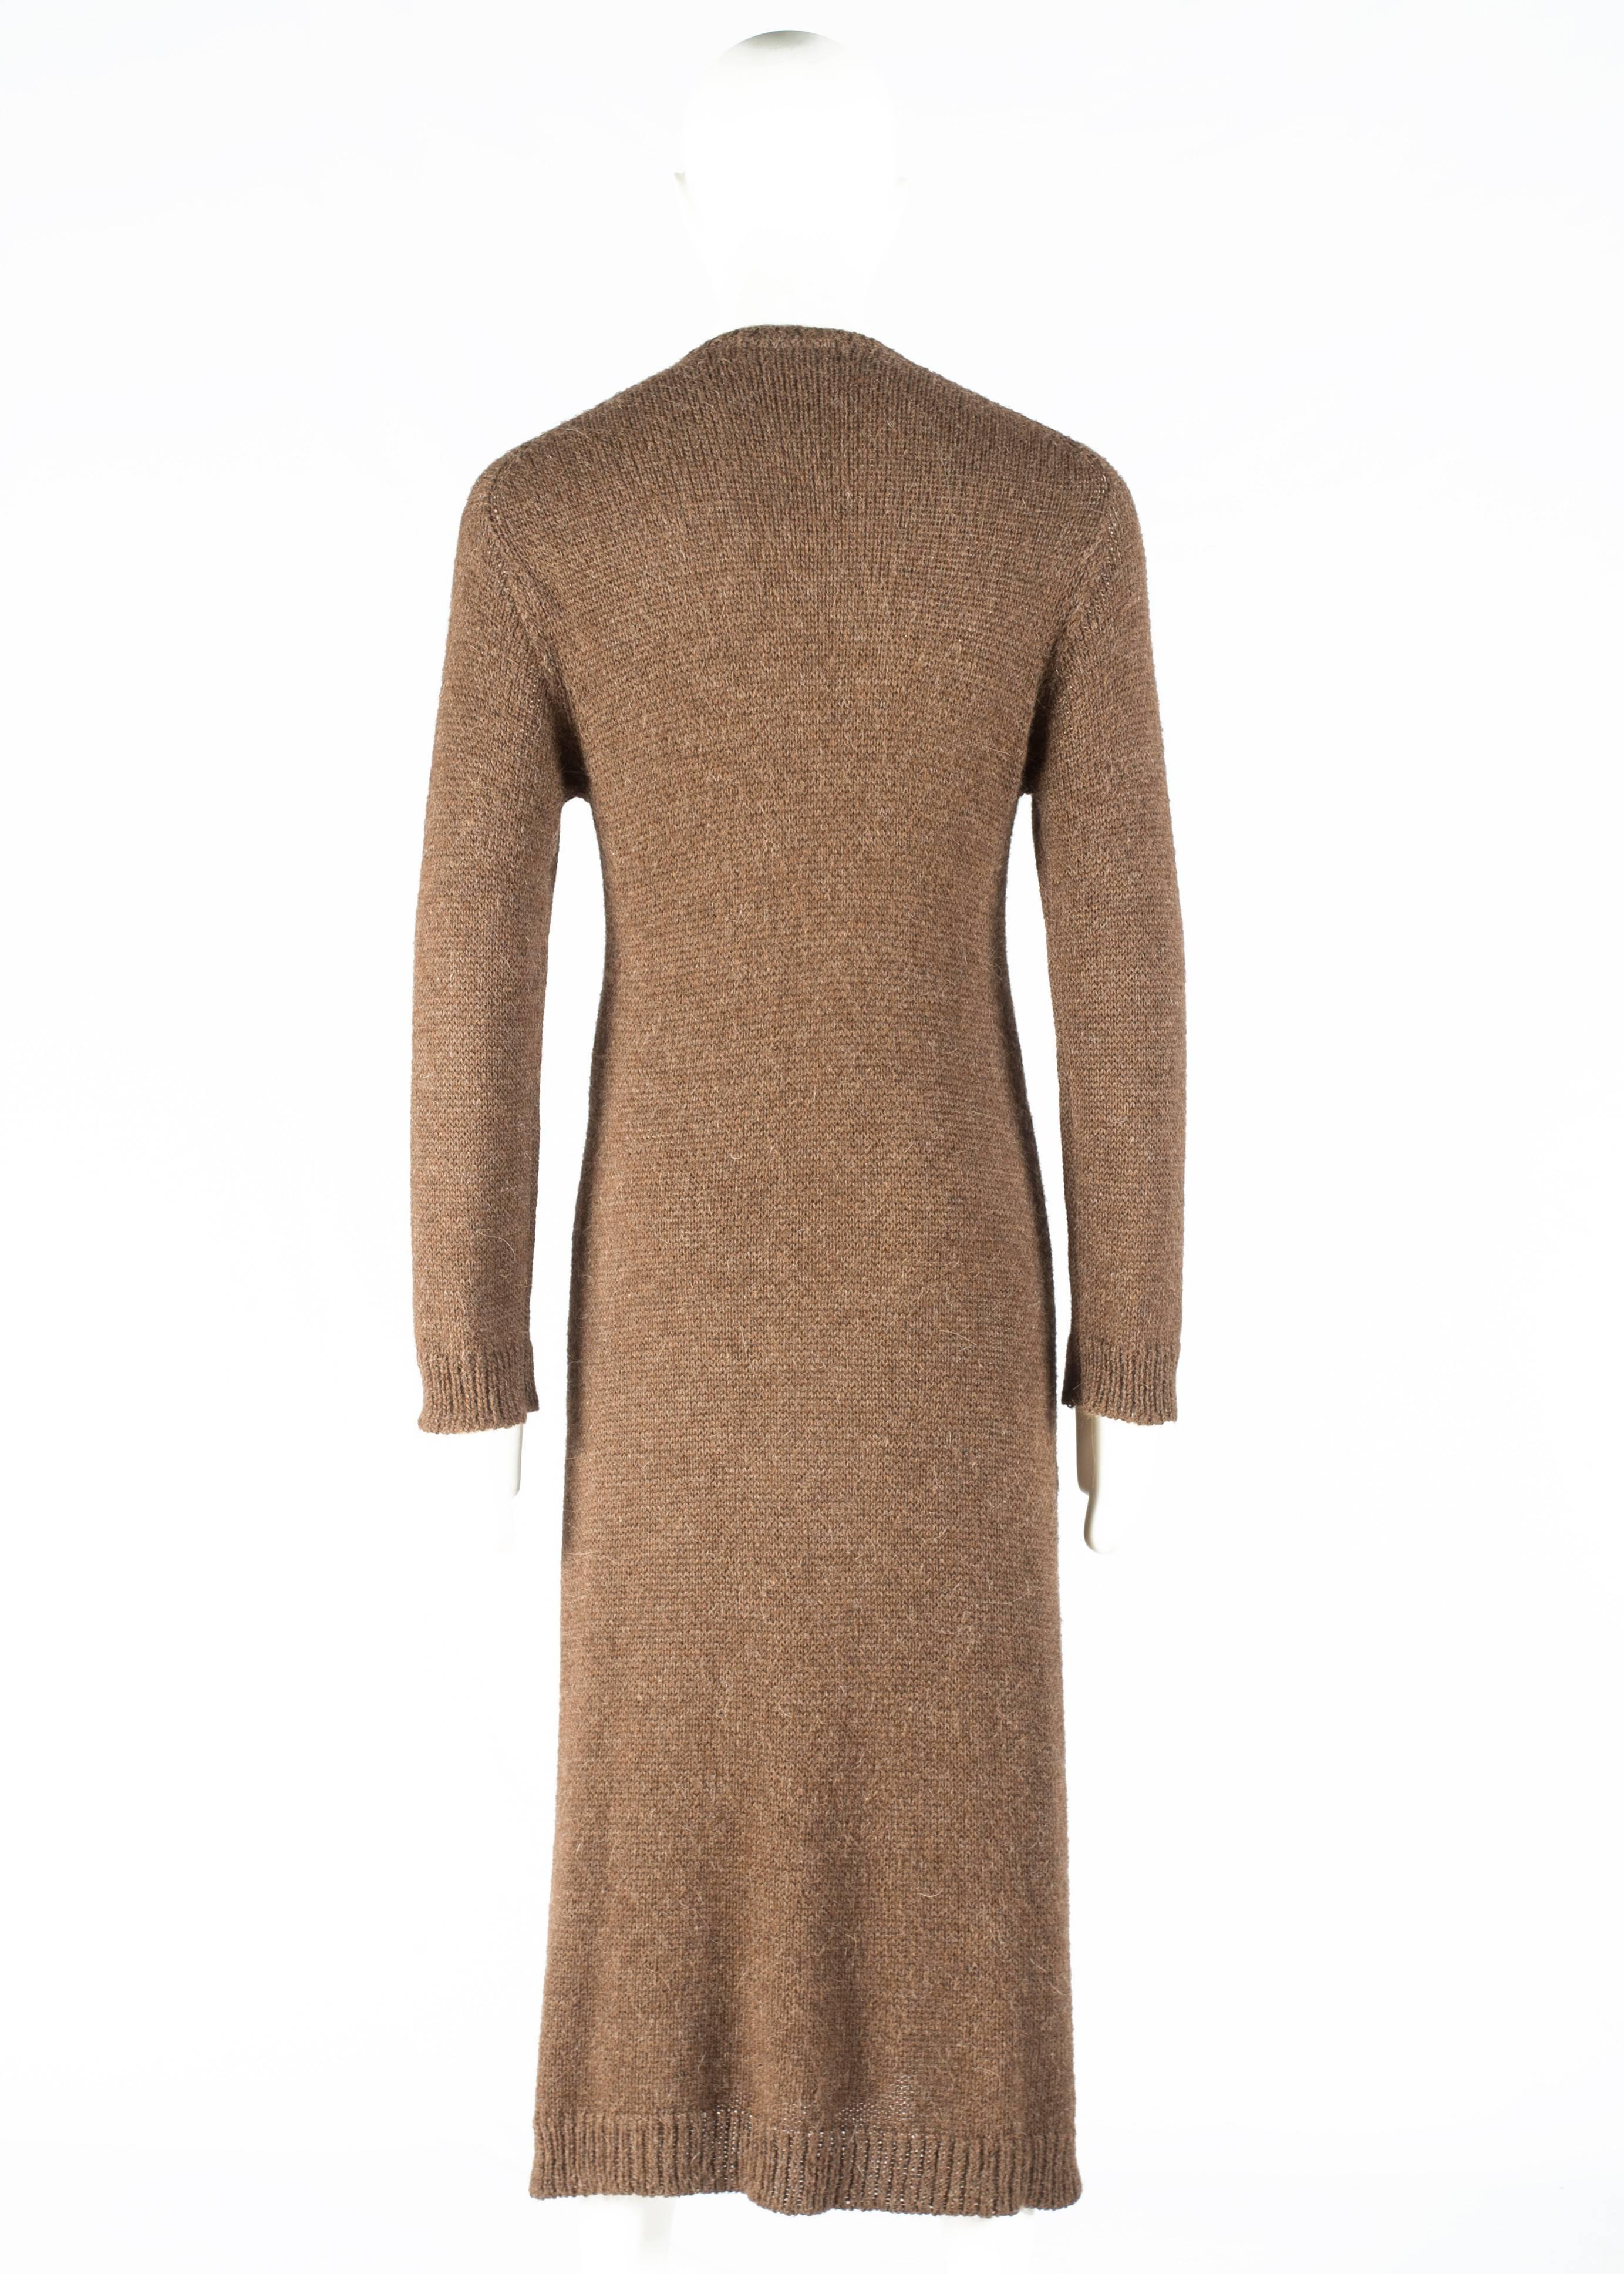 Brown Comme des Garcons Homme Plus brown wool knitted v-neck sweater dress, A / W 1995 For Sale